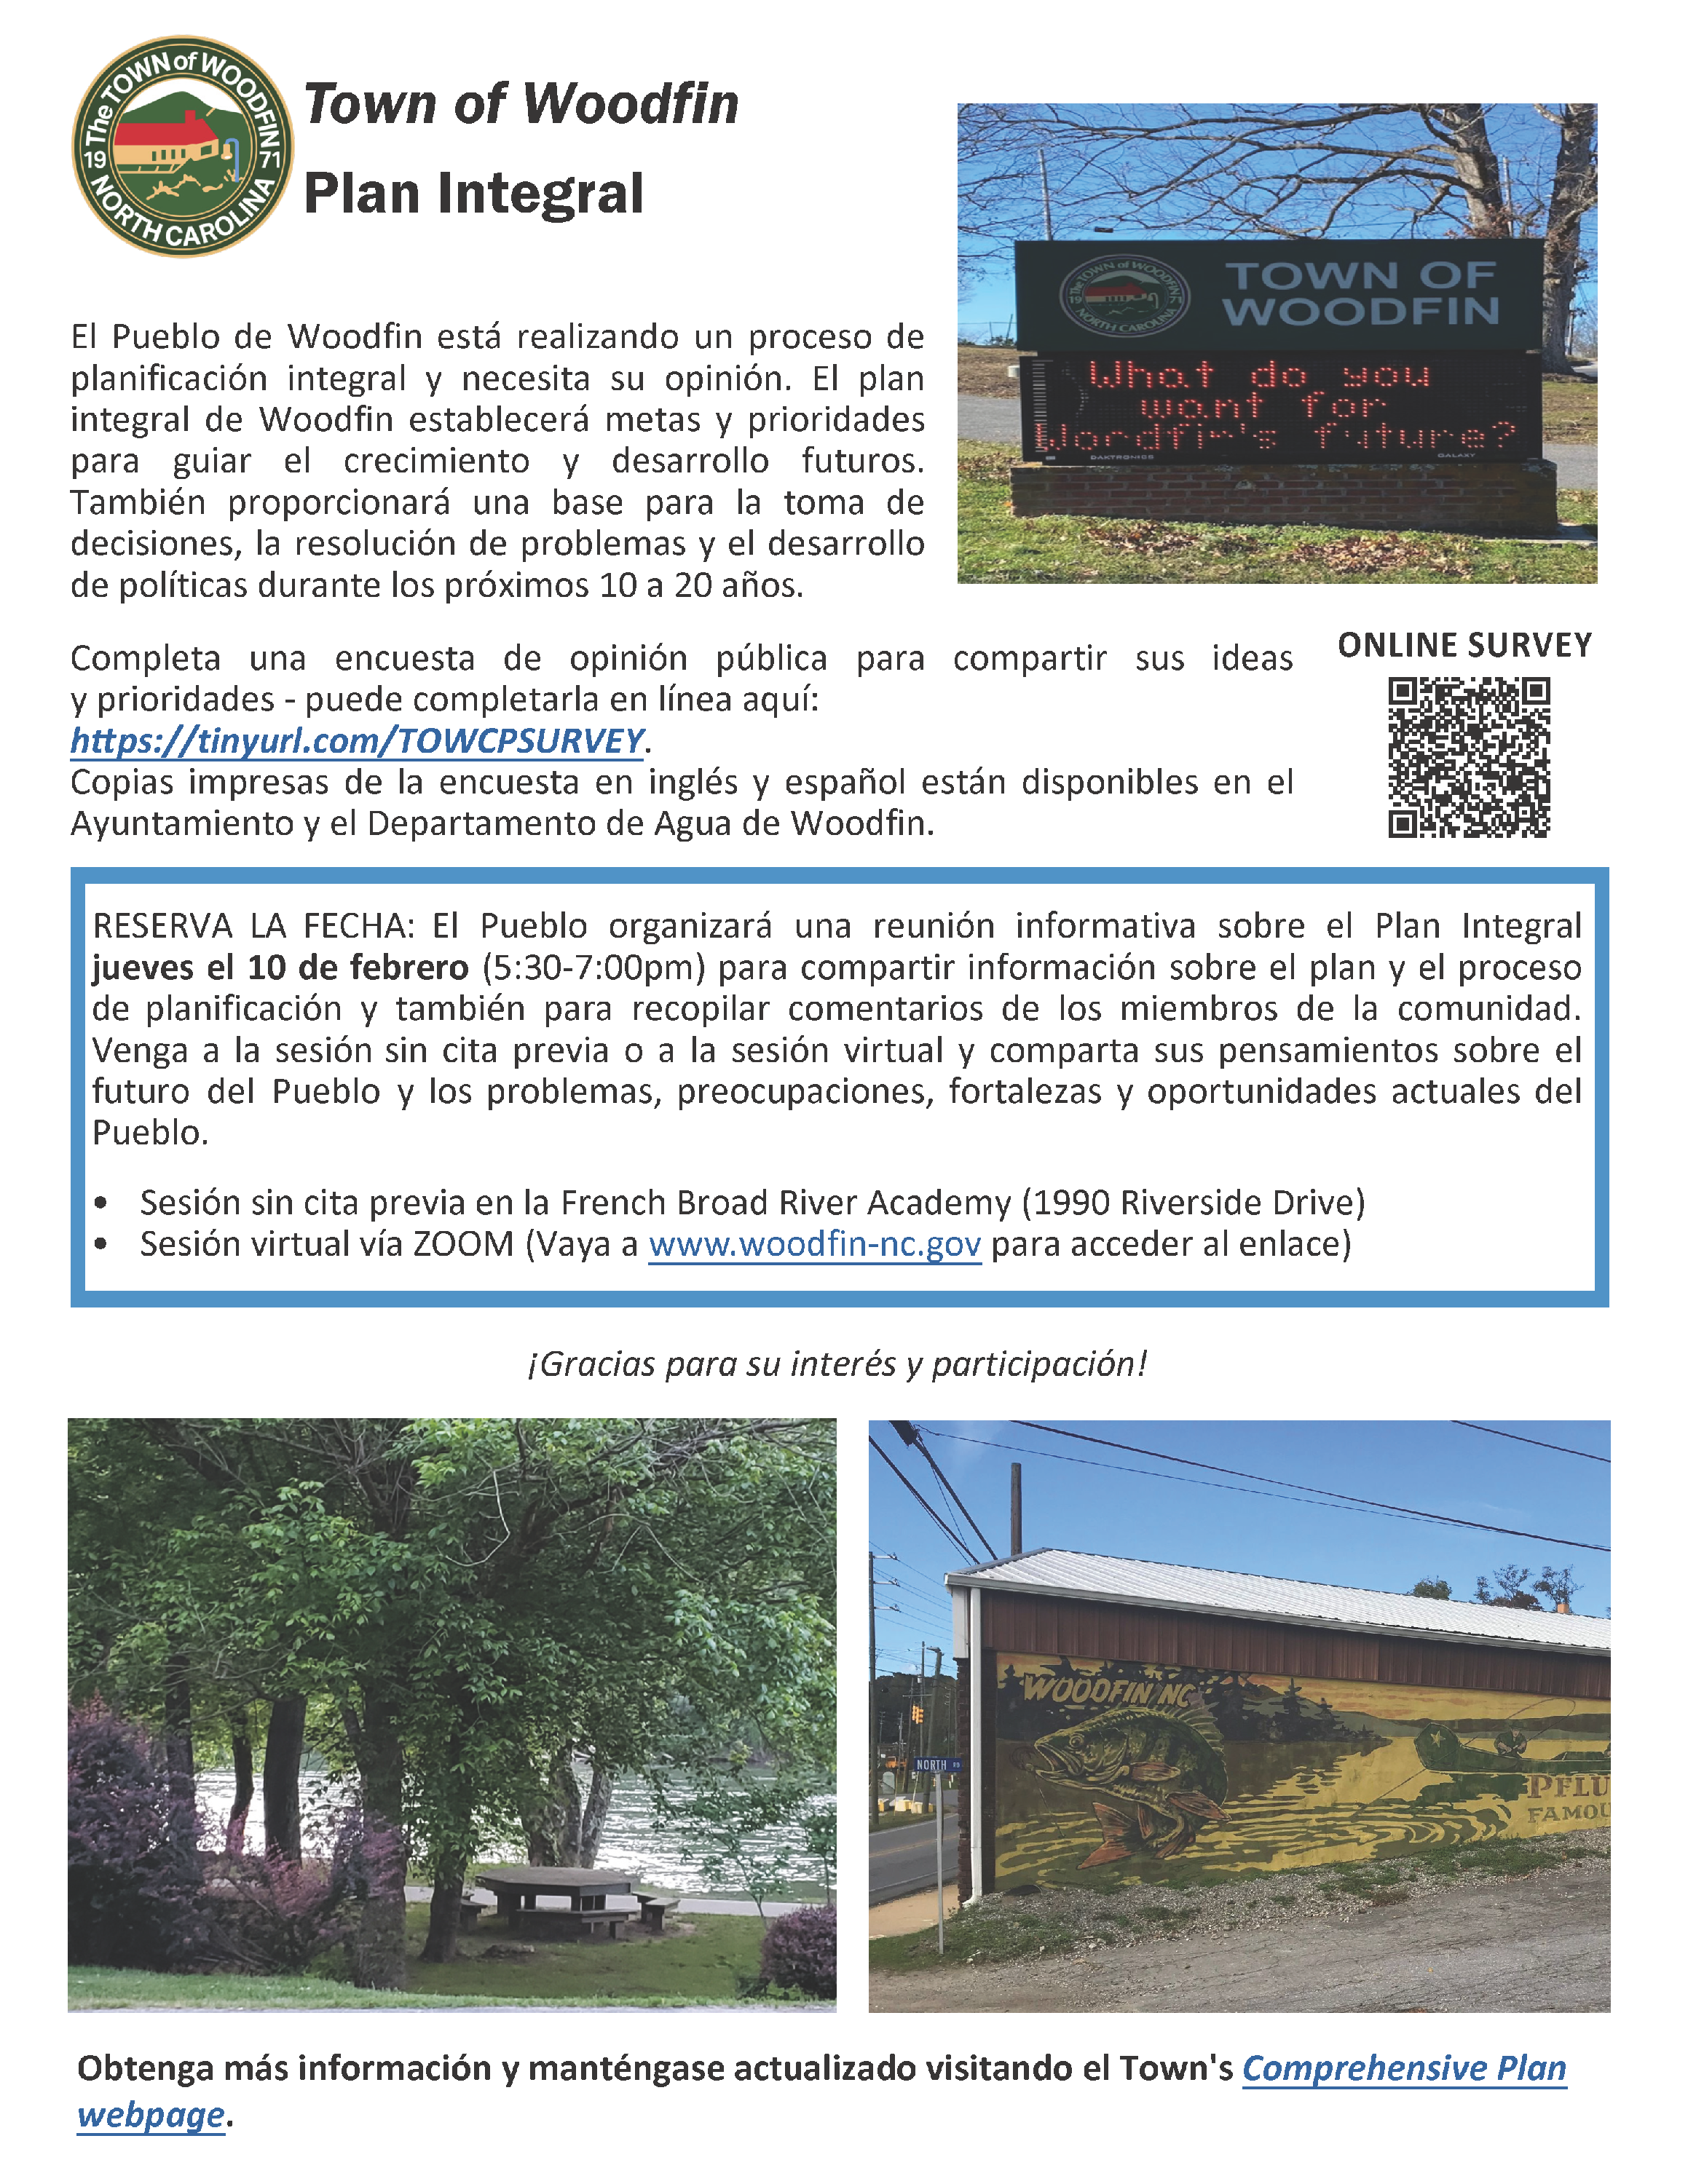 Woodfin Community Engagement Flyer_FINAL_2.1.22 (spanish)